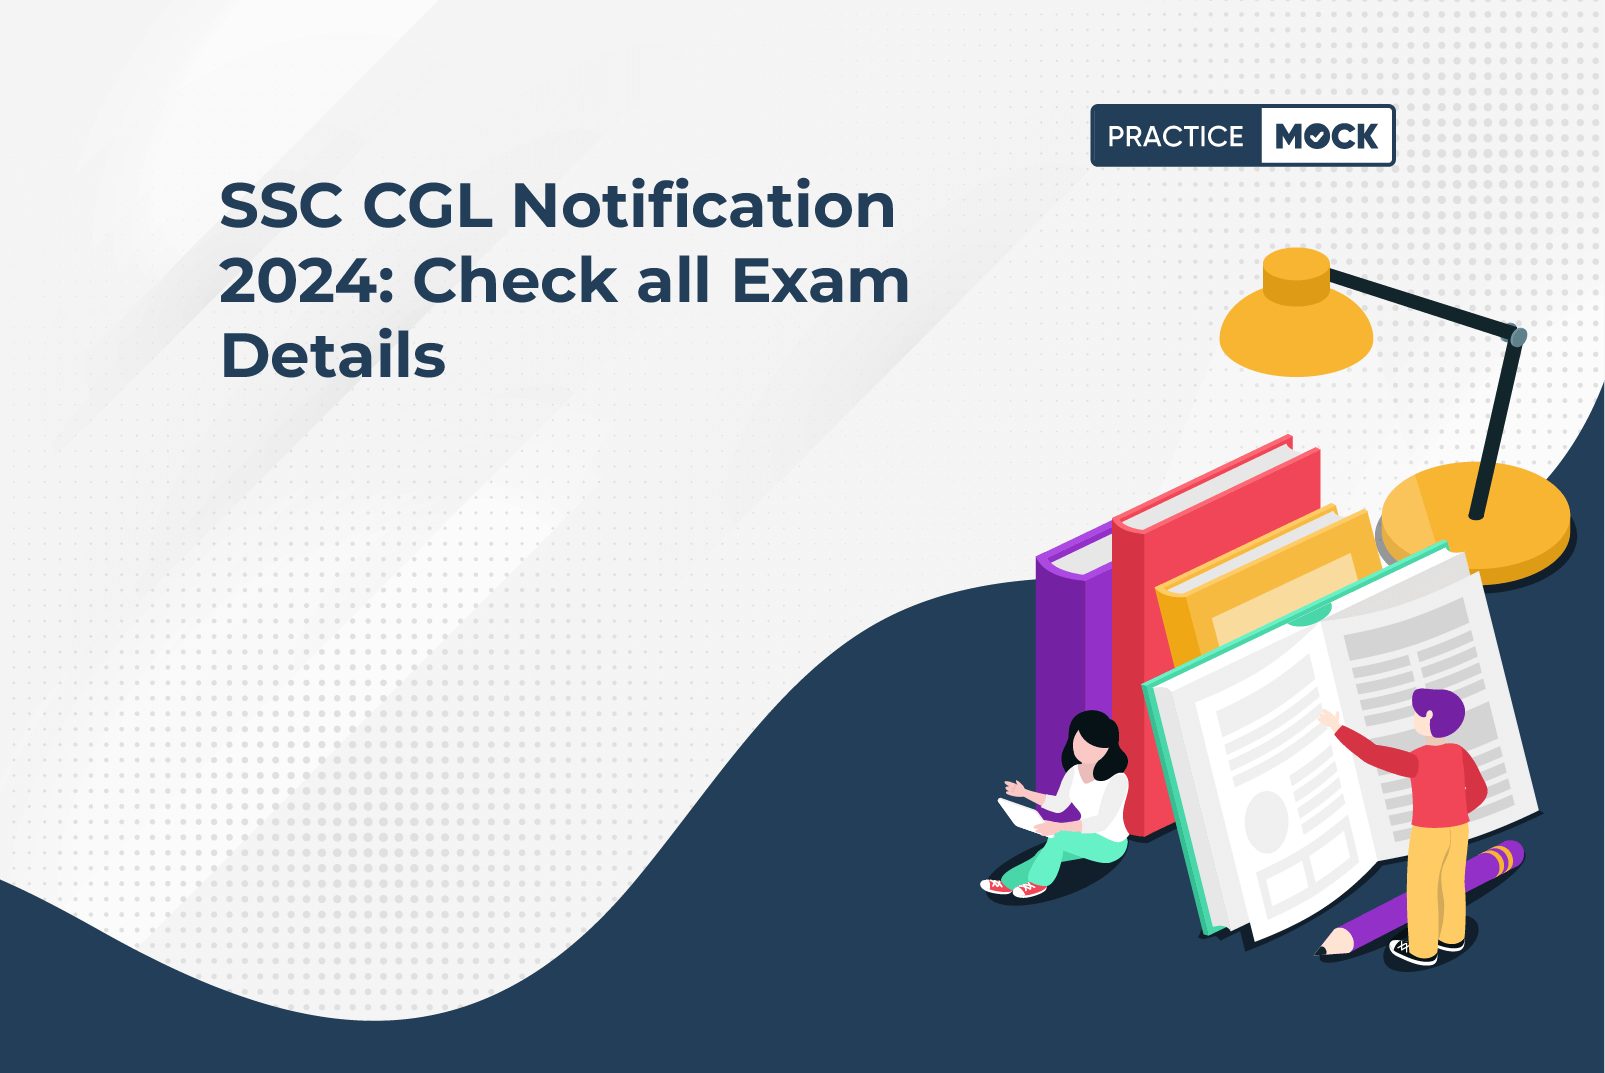 SSC CGL Notification 2024: Check all Exam Details